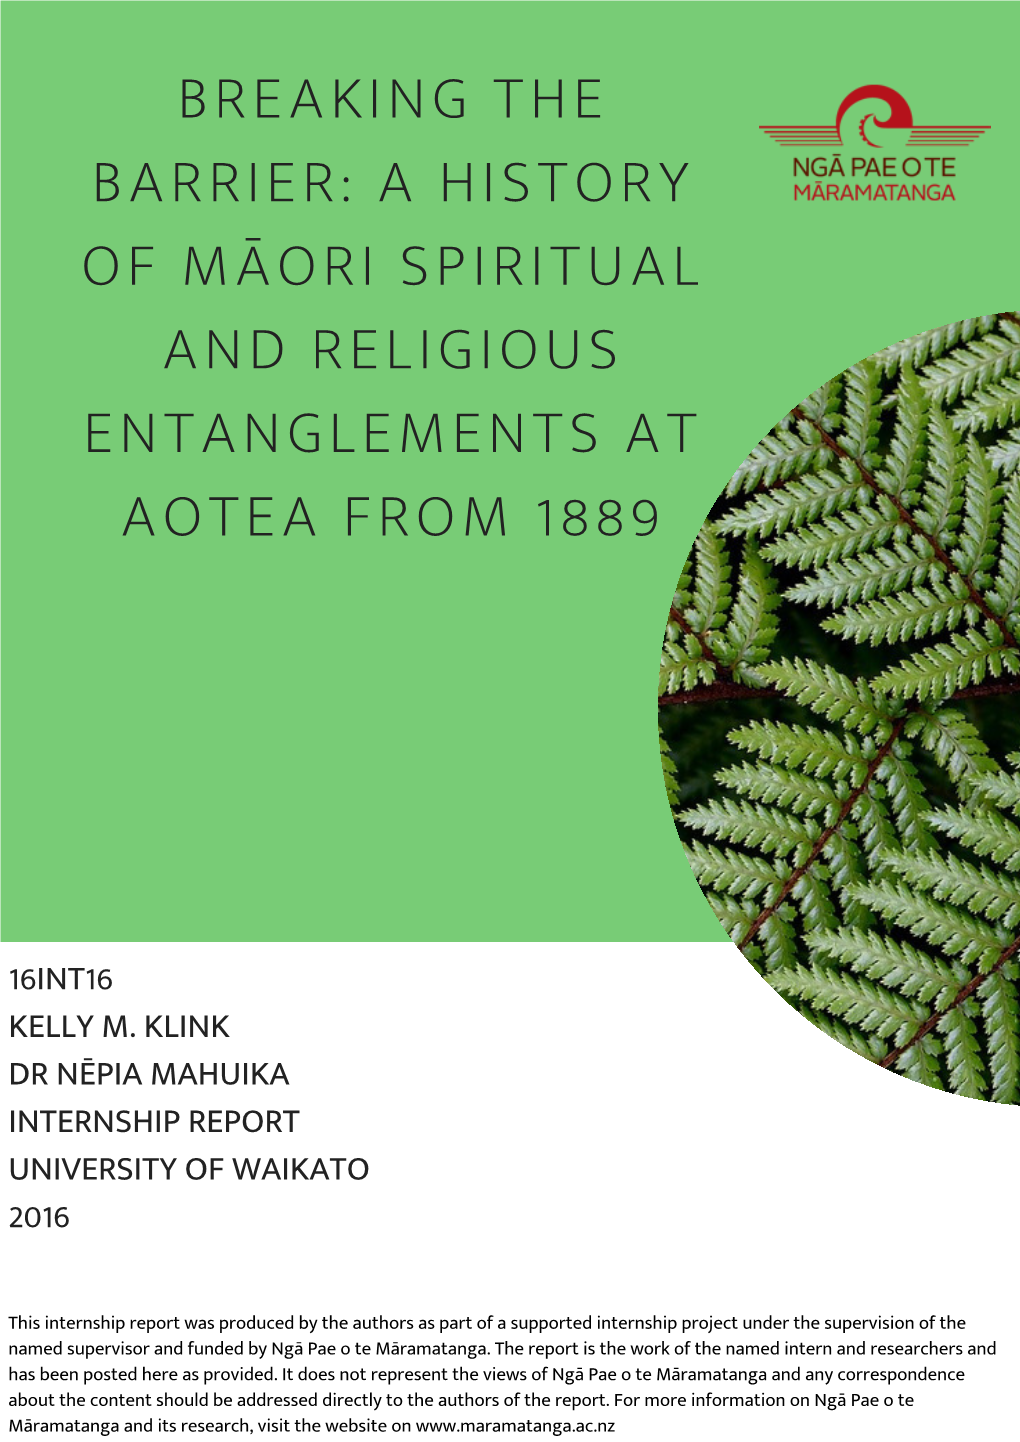 Breaking the Barrier: a History of Māori Spiritual and Religious Entanglements at Aotea from 1889